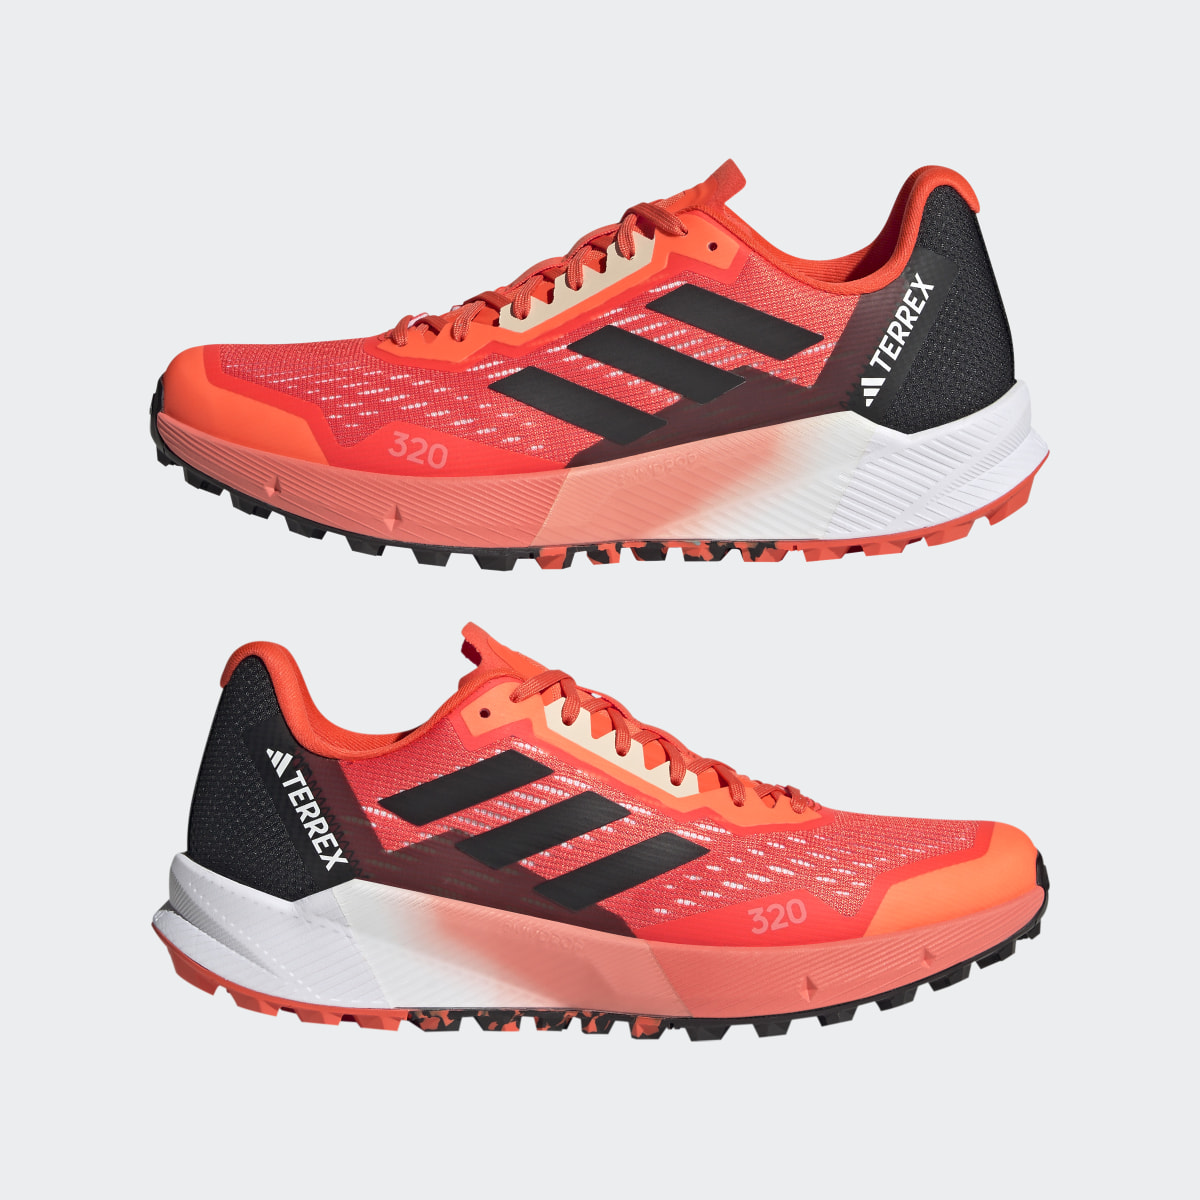 Adidas Terrex Agravic Flow Trail Running Shoes 2.0. 8